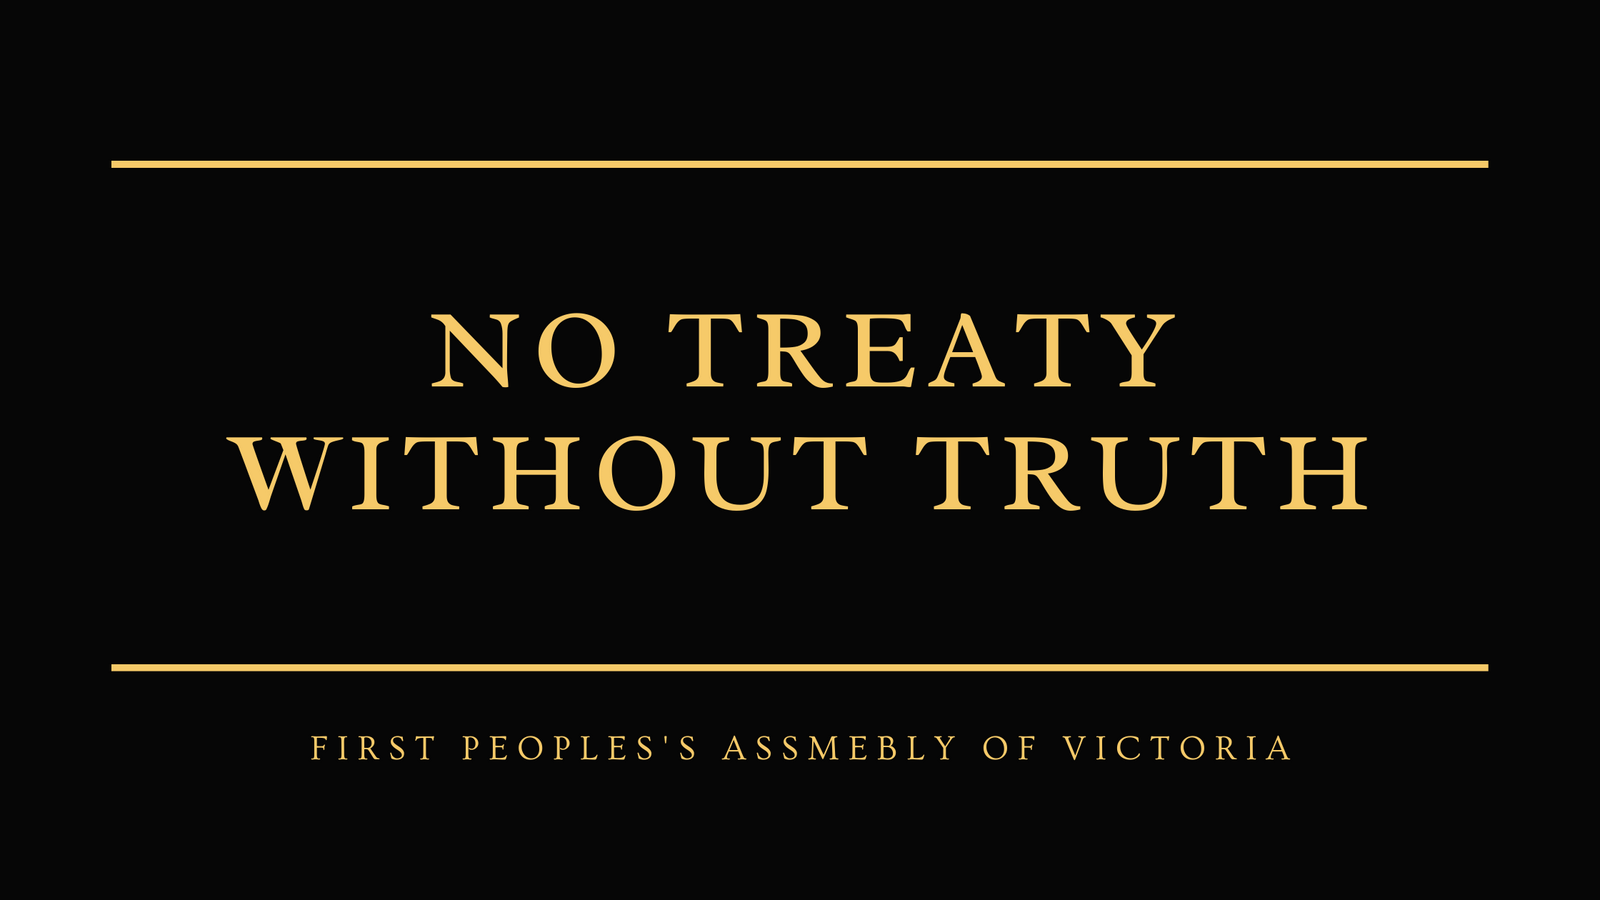 No Treaty without TRUTH